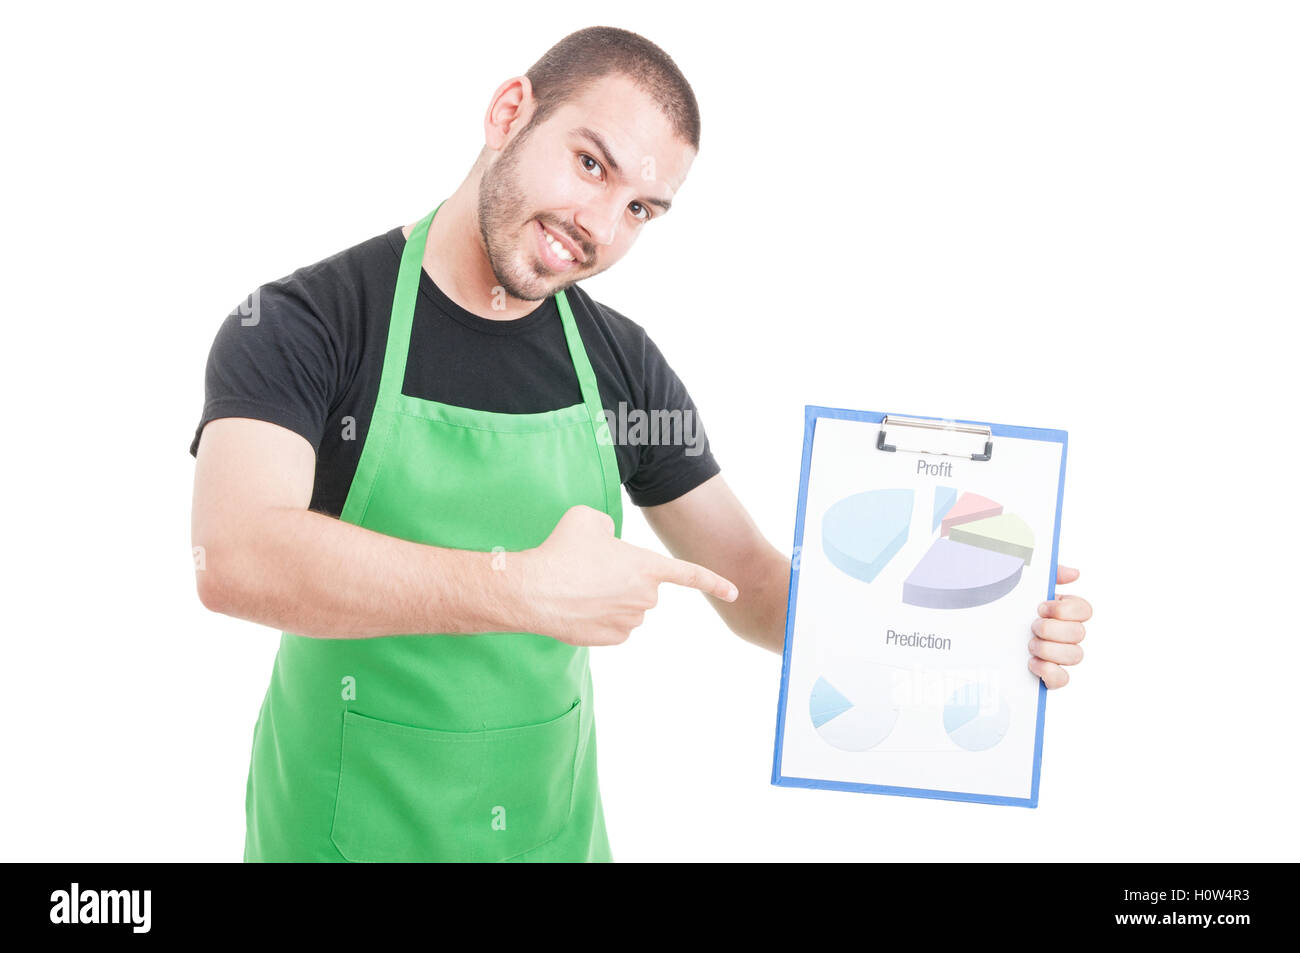 Hypermarket clerk pointing on profit and predictions clipboard isolated on white background with copy text space Stock Photo